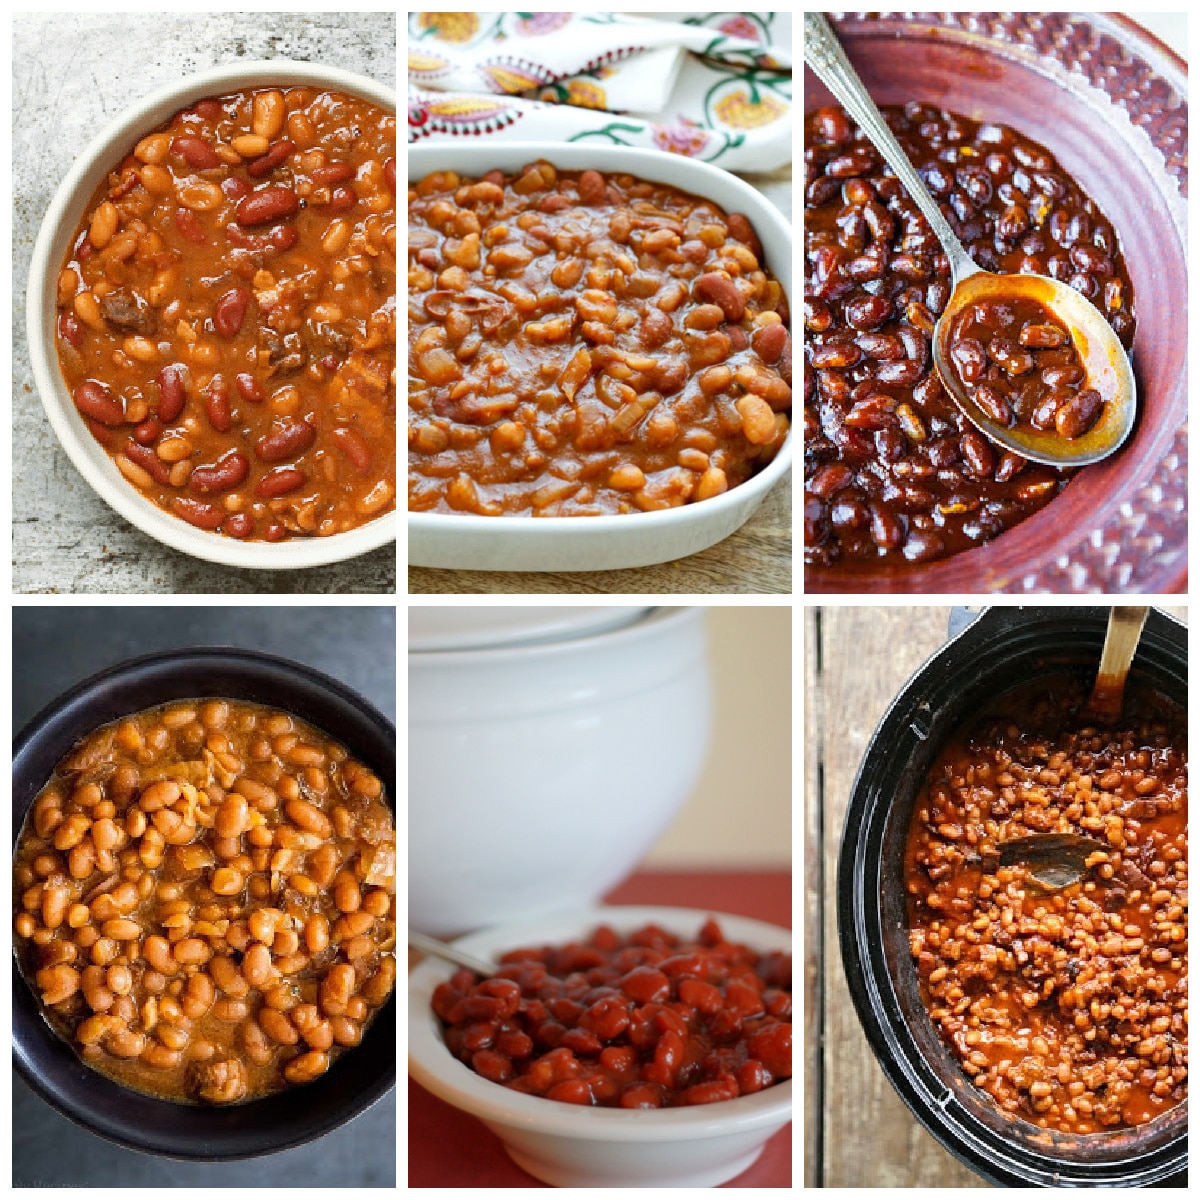 Slow Cooker Baked Beans Recipes collage of featured recipes